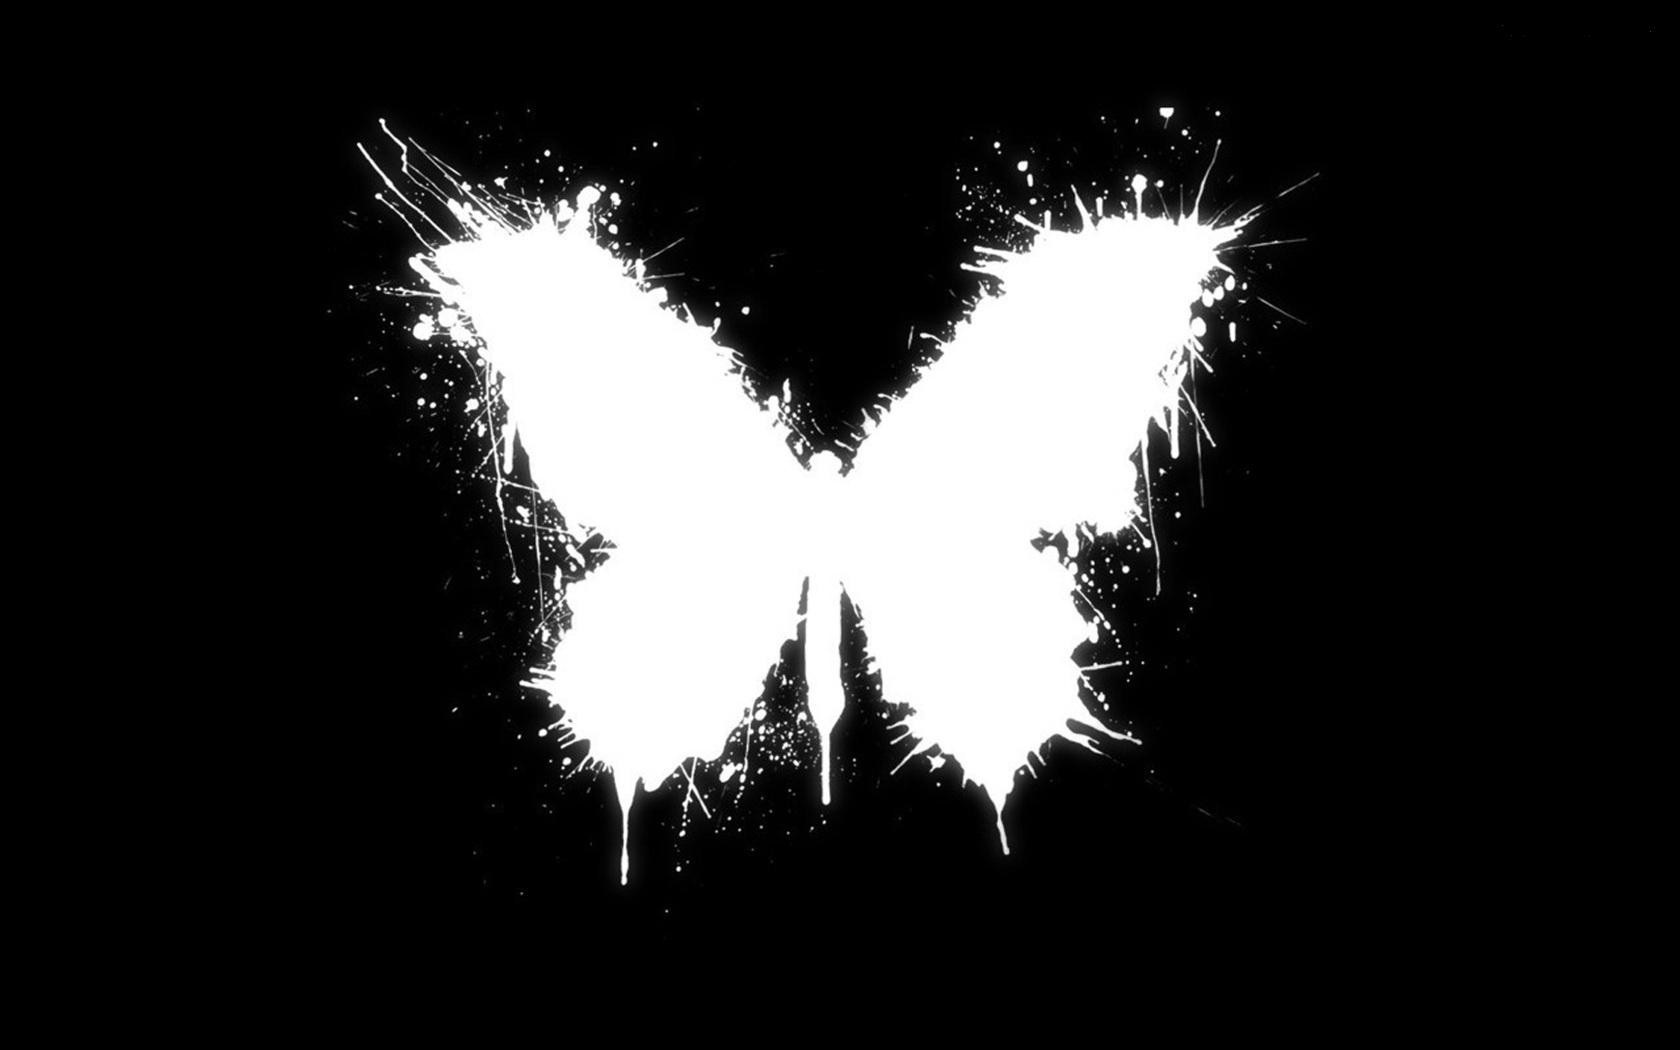 Butterfly Black Vector Design Hd Wallpapers - White Pictures With Black  Background - 1680x1050 Wallpaper 